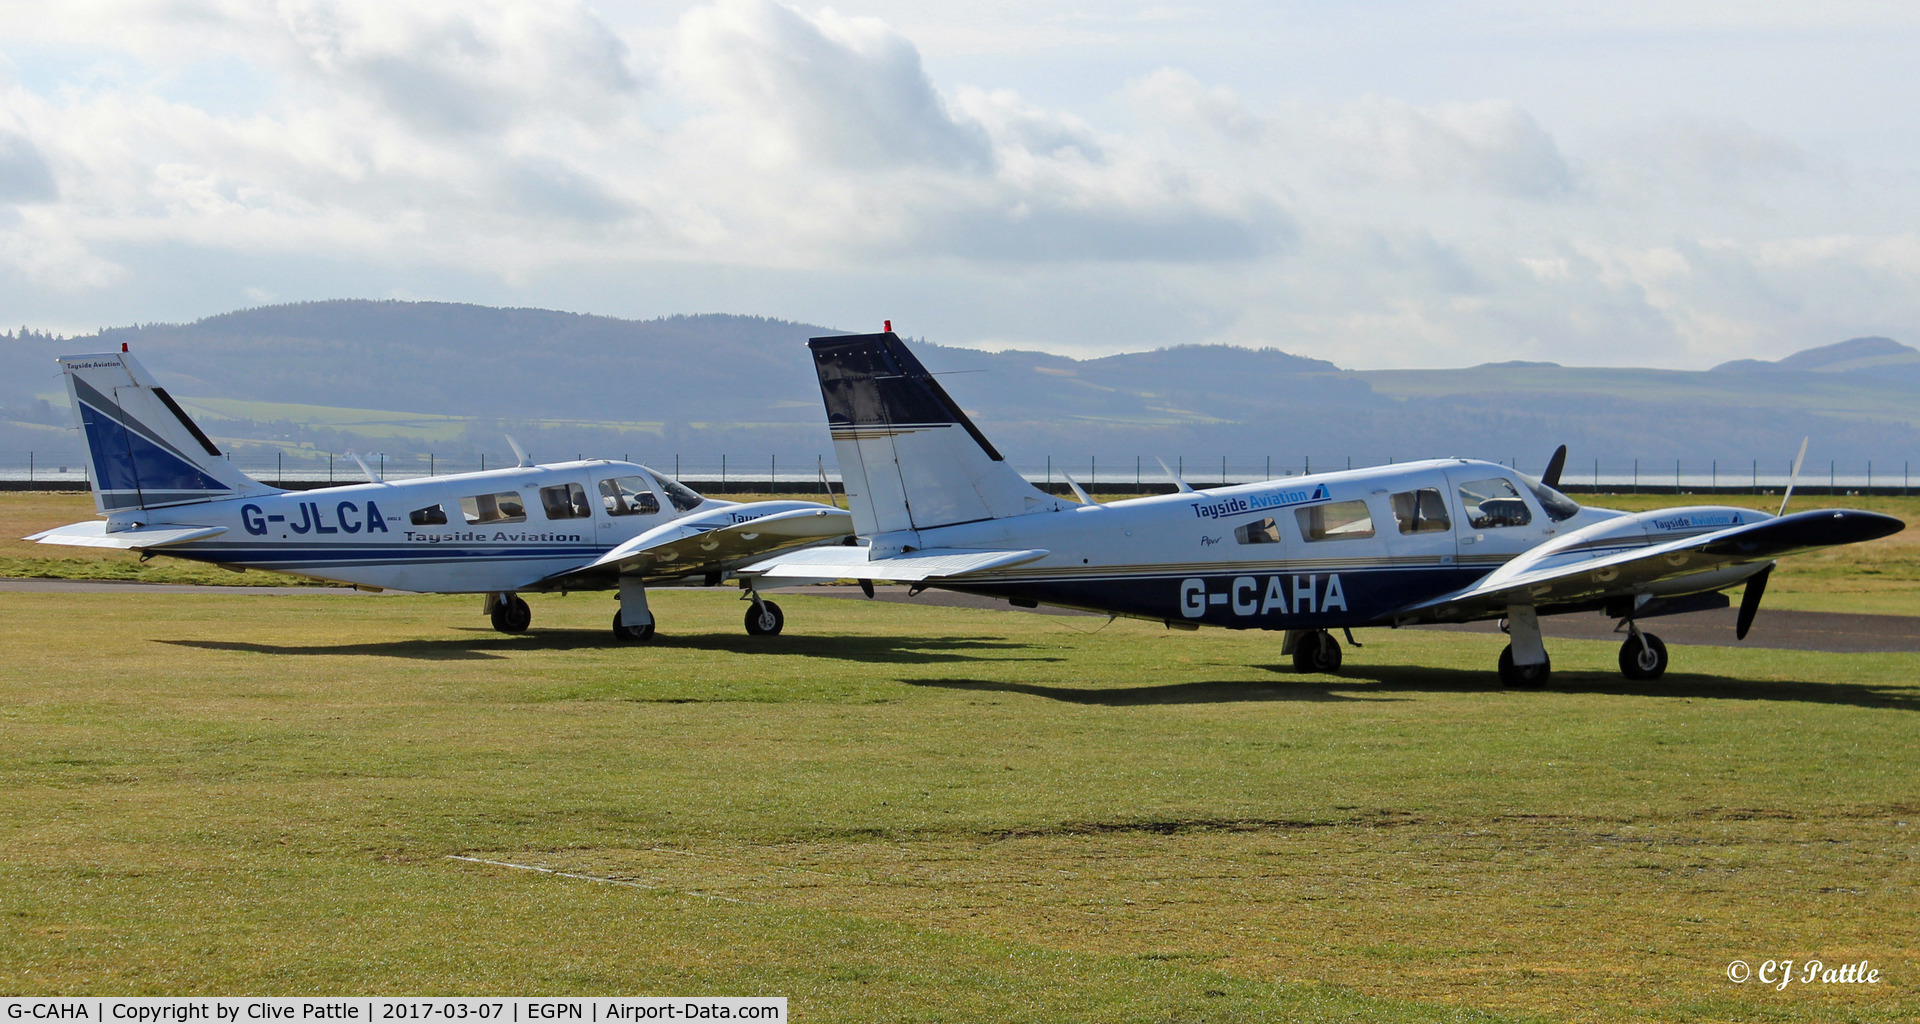 G-CAHA, 1977 Piper PA-34-200T Seneca II C/N 34-7770010, Tayside Aviation's new acquisition at its home base at Dundee - pictured alongside stable-mate G-JLCA